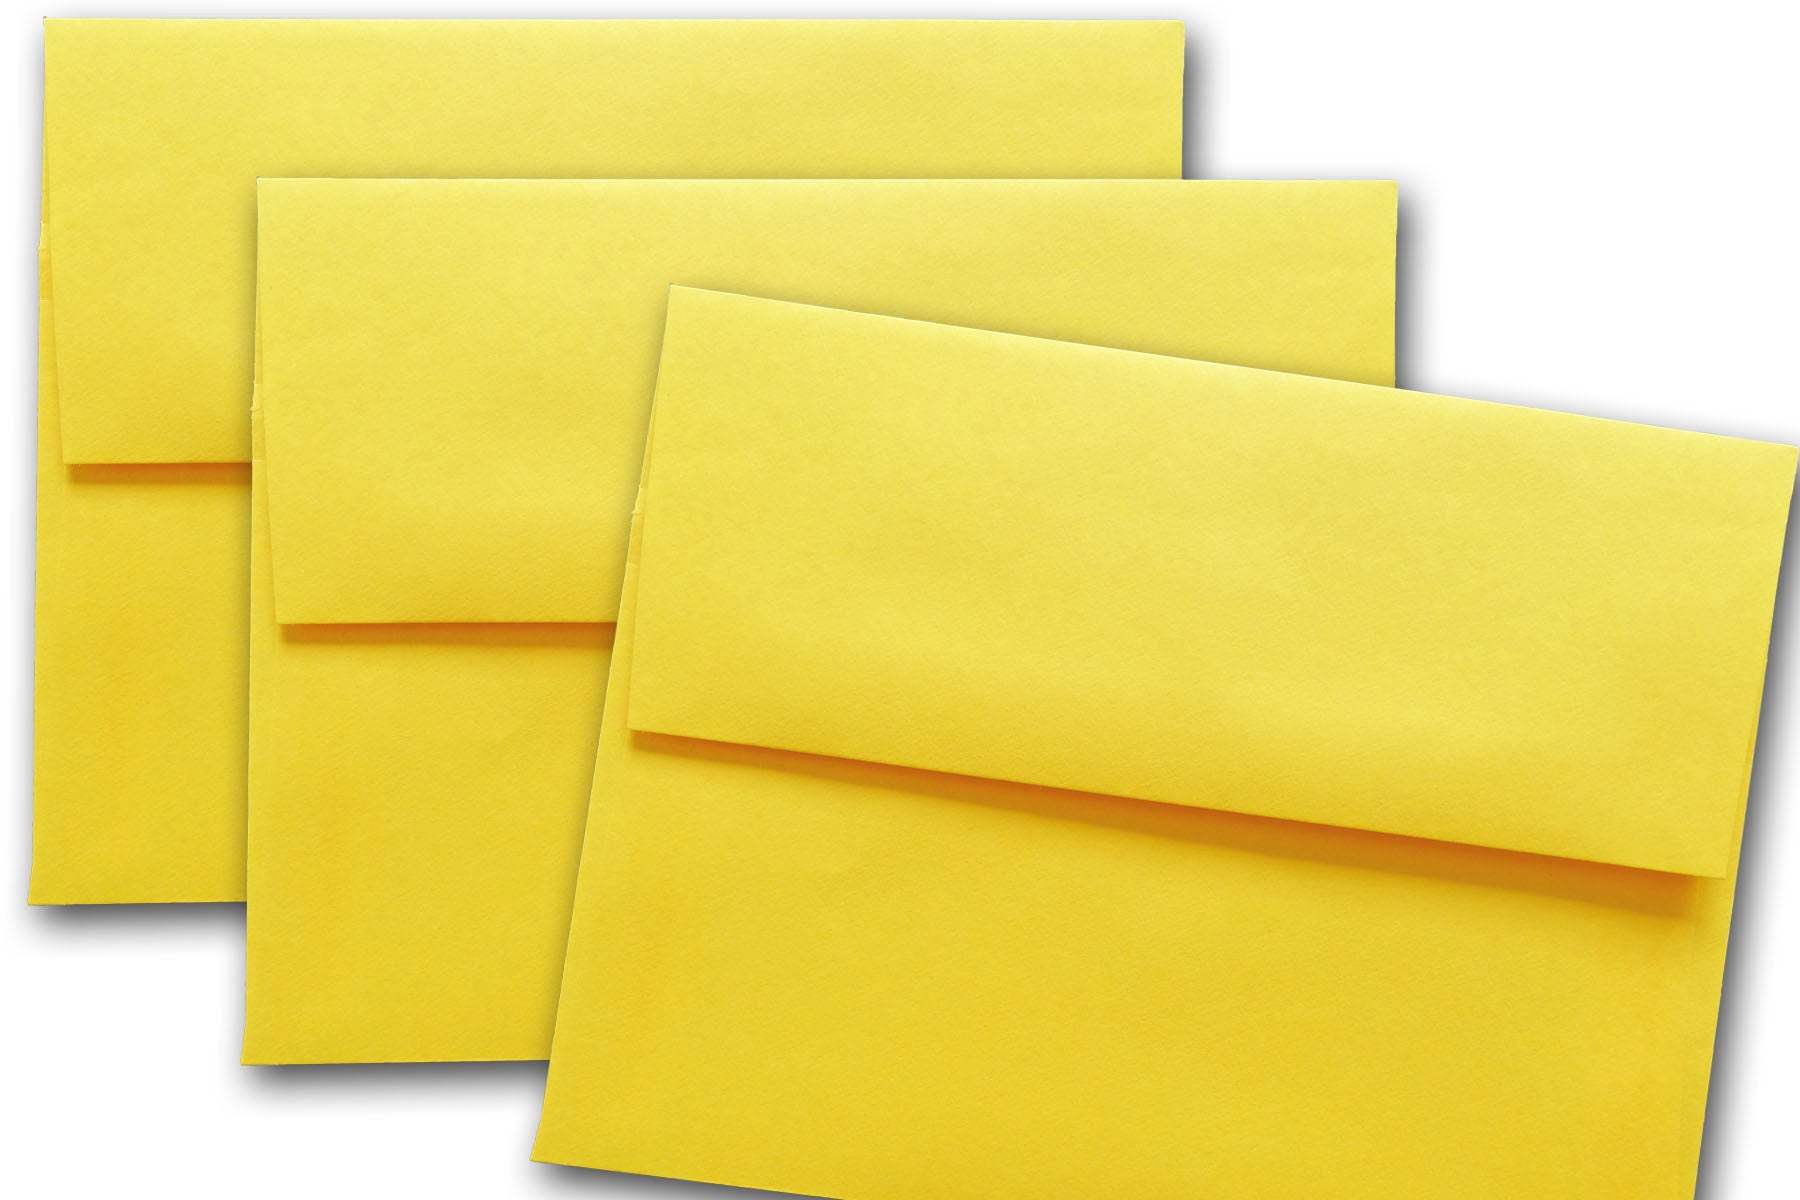 A2 NEW Astrobright Color,White or Vanilla Paper Envelopes 4 3/8 x 5 3/4  PE28 - Helia Beer Co